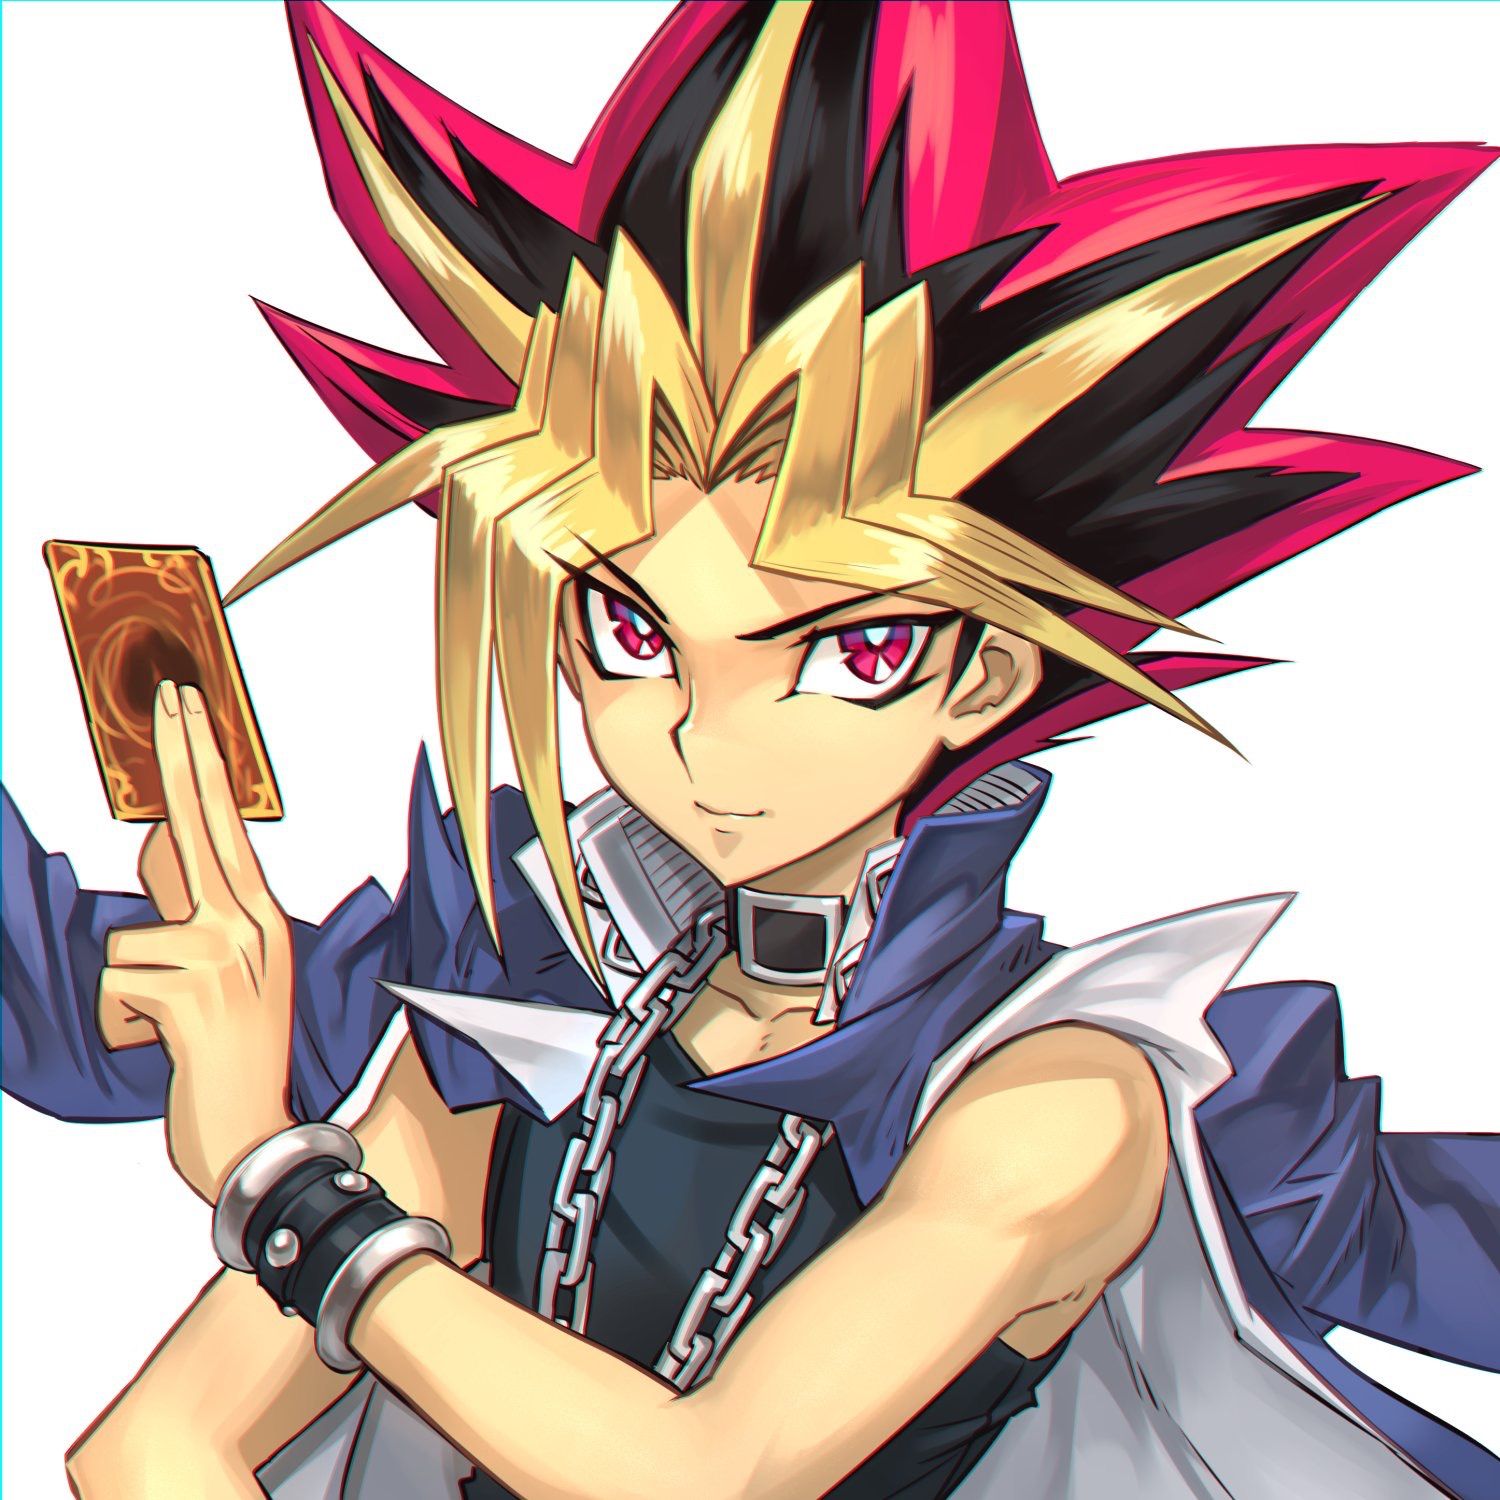 May Yugioh live on forever. 